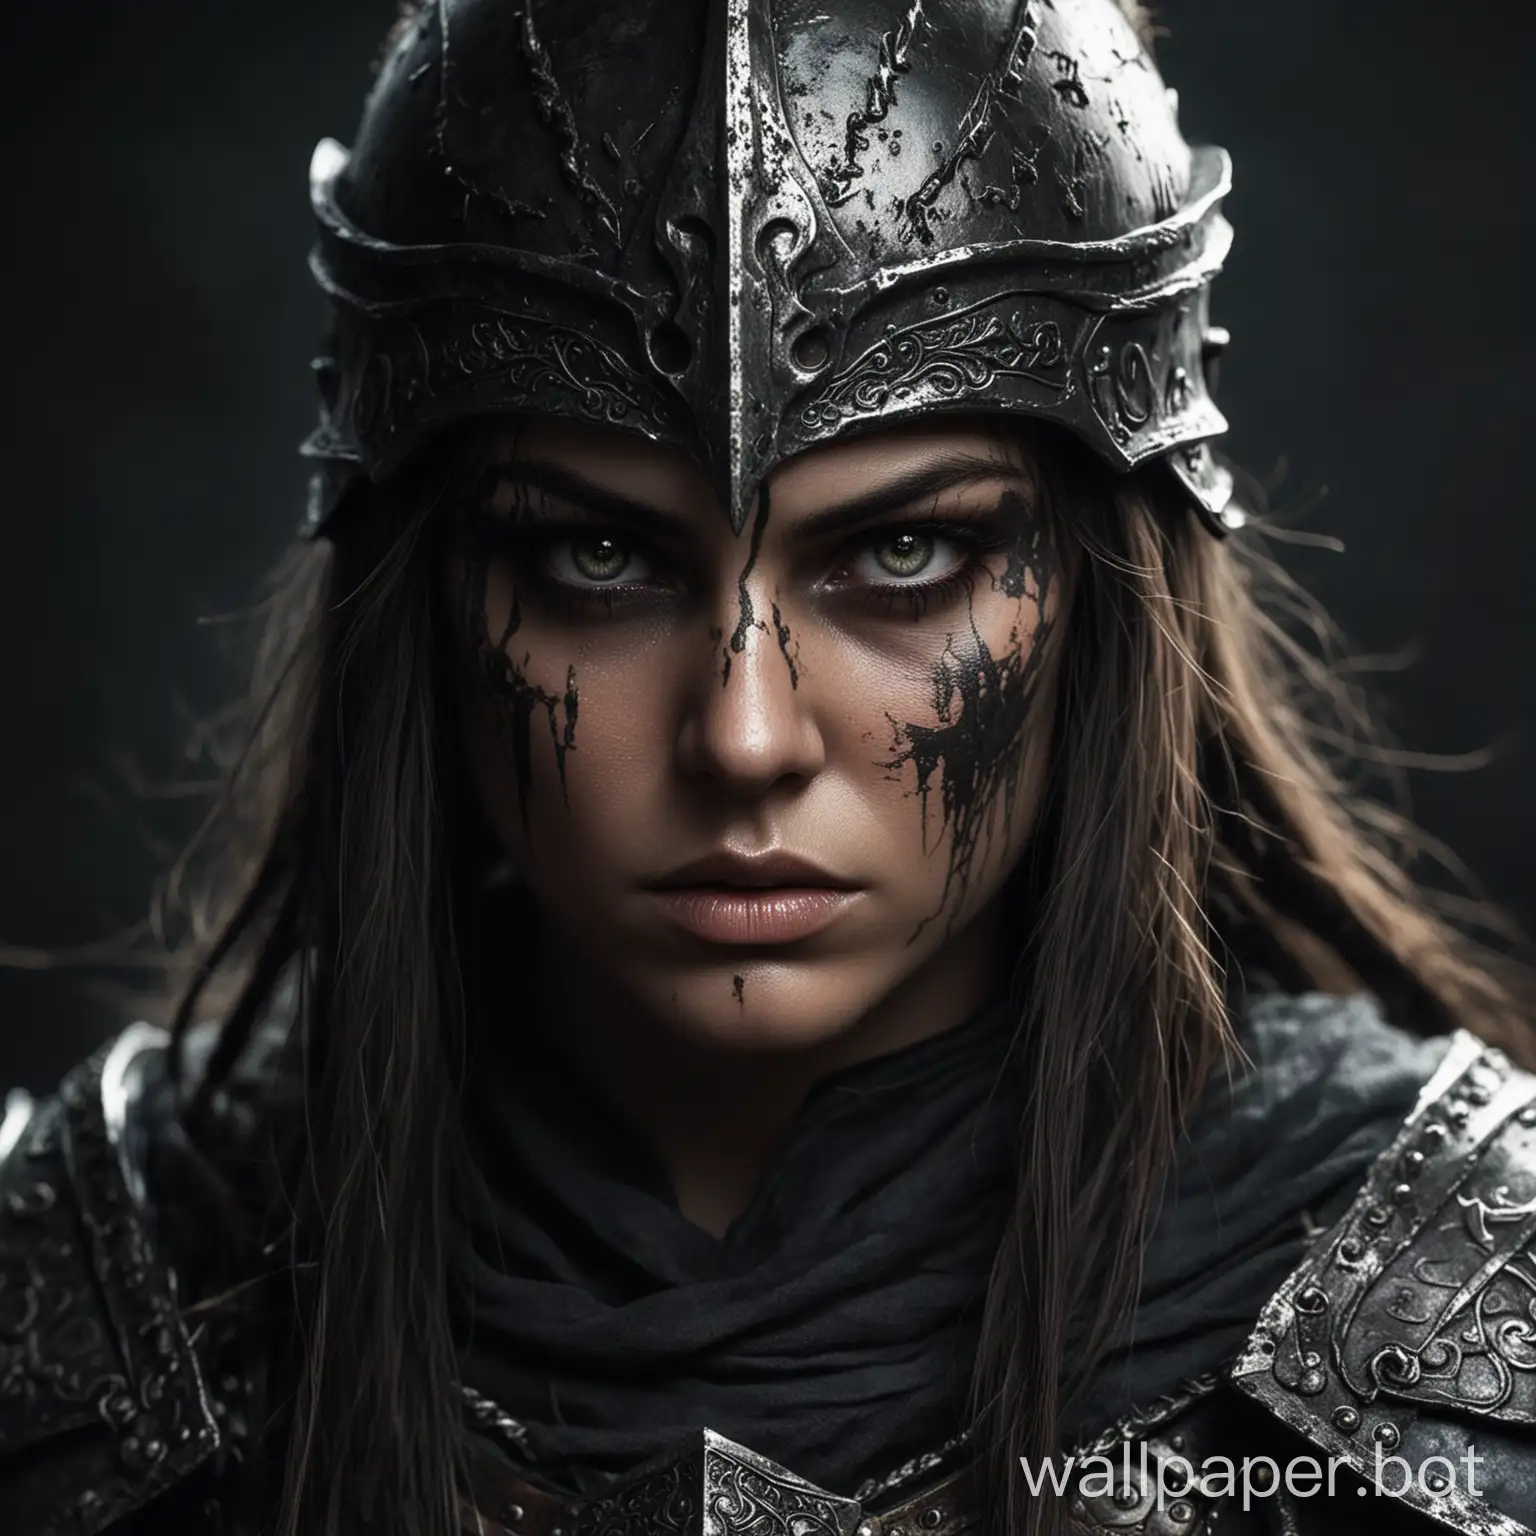 So, use that for the background or a dark background. I want a face of a fierce warrior at the center. With eyes that show no emotion but also looks very dangerous. It must be dark, mysterious and give the idea of seriousness about the game.